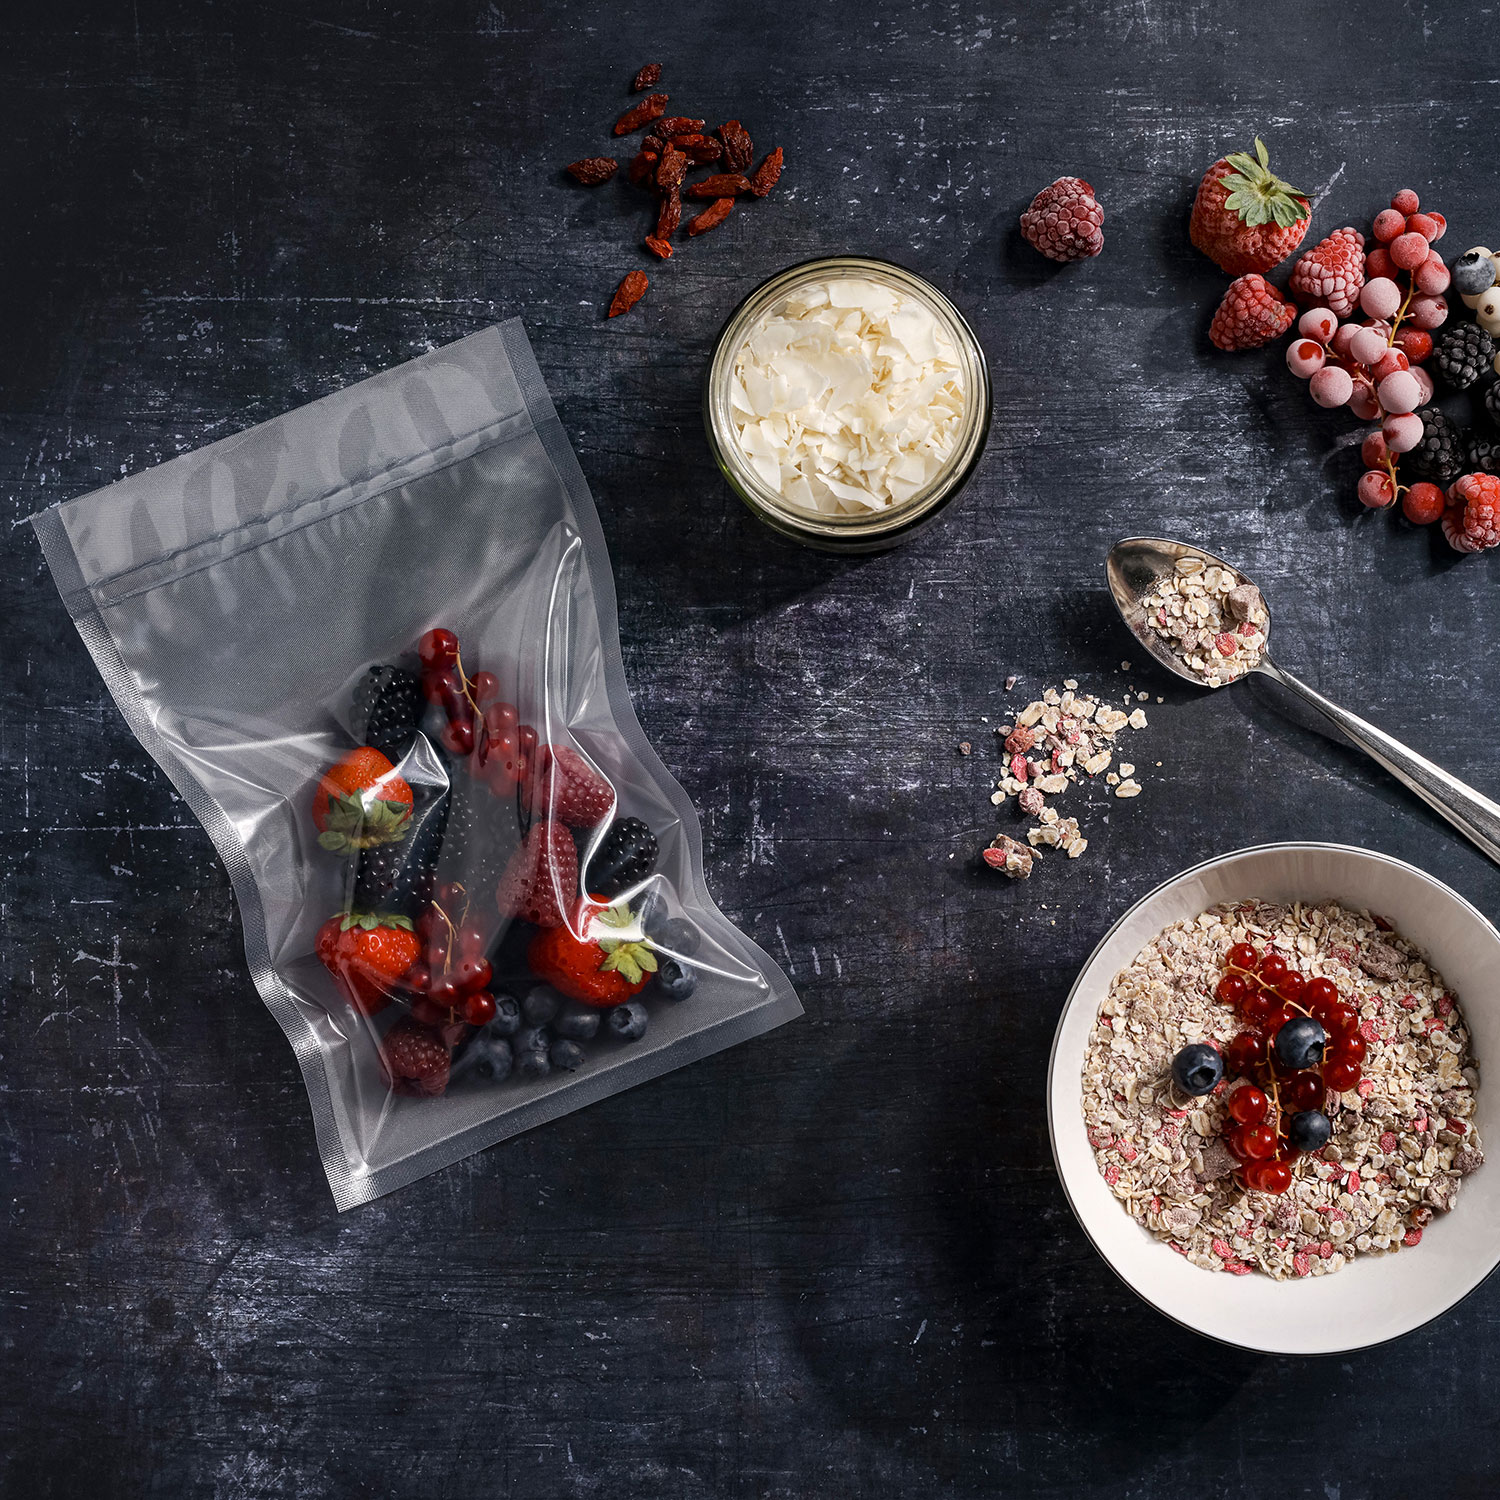 Smallest bag size from the vacuum bag mix-set, with berries vacuum-sealed inside